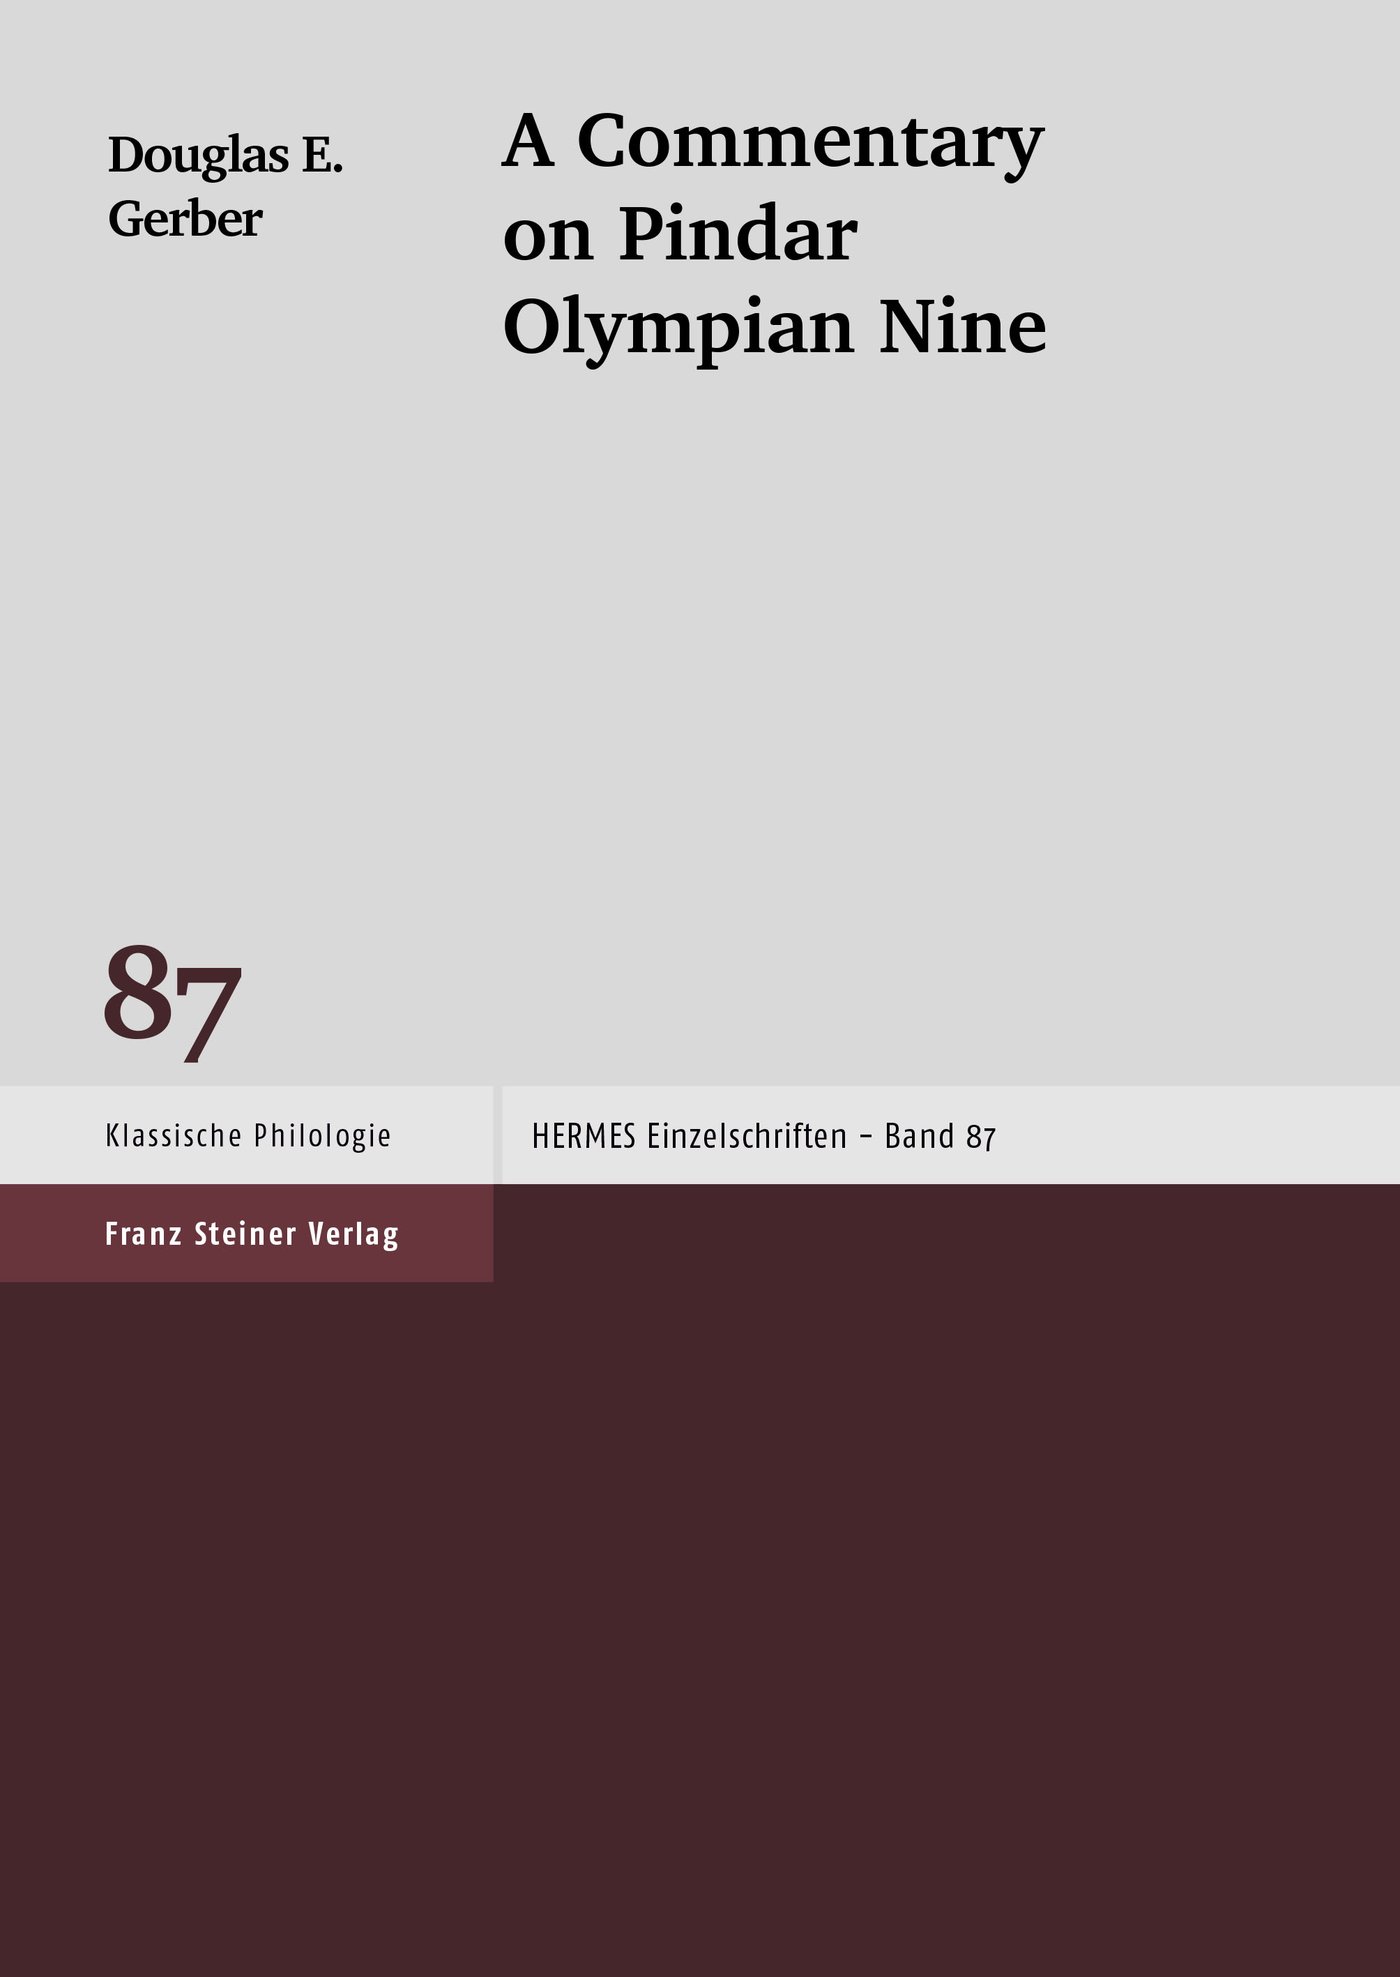 A Commentary on Pindar "Olympian" 9